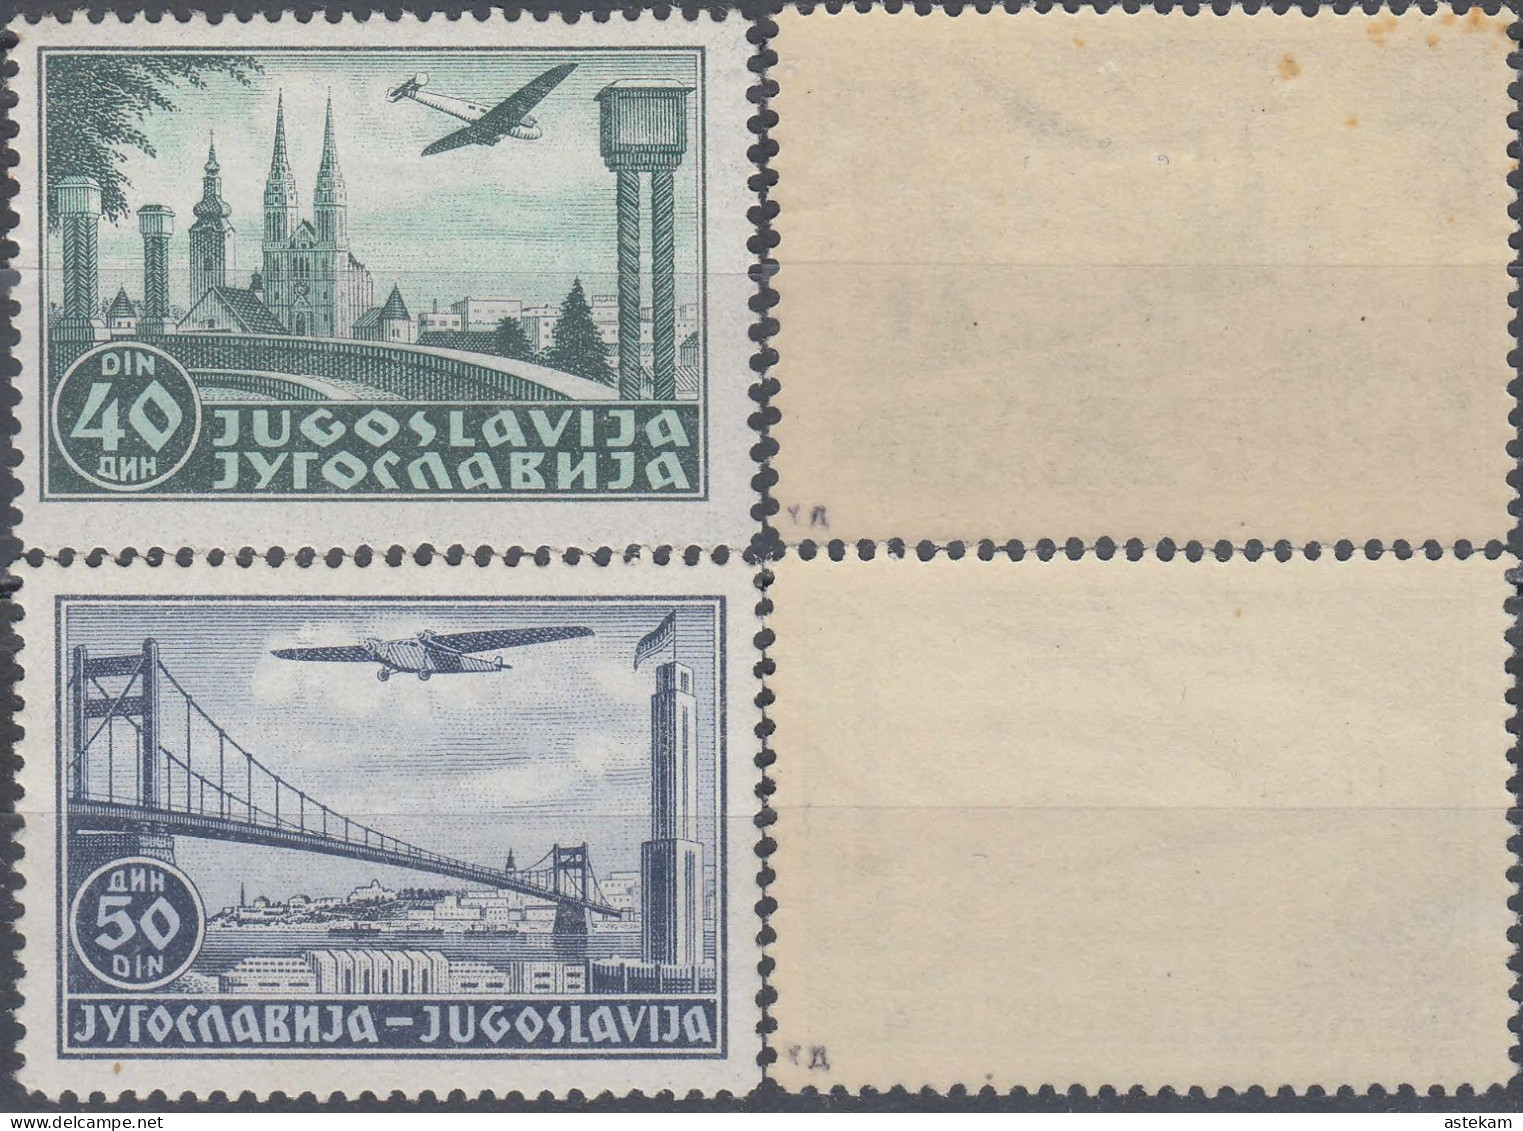 YUGOSLAVIA 1940, AIRPLANES And BRIDG, COMPLETE, MNH SERIES, The FIRST STAMP Has SMALL YELLOW SPOTS In The UPPER CORNER - Ongebruikt